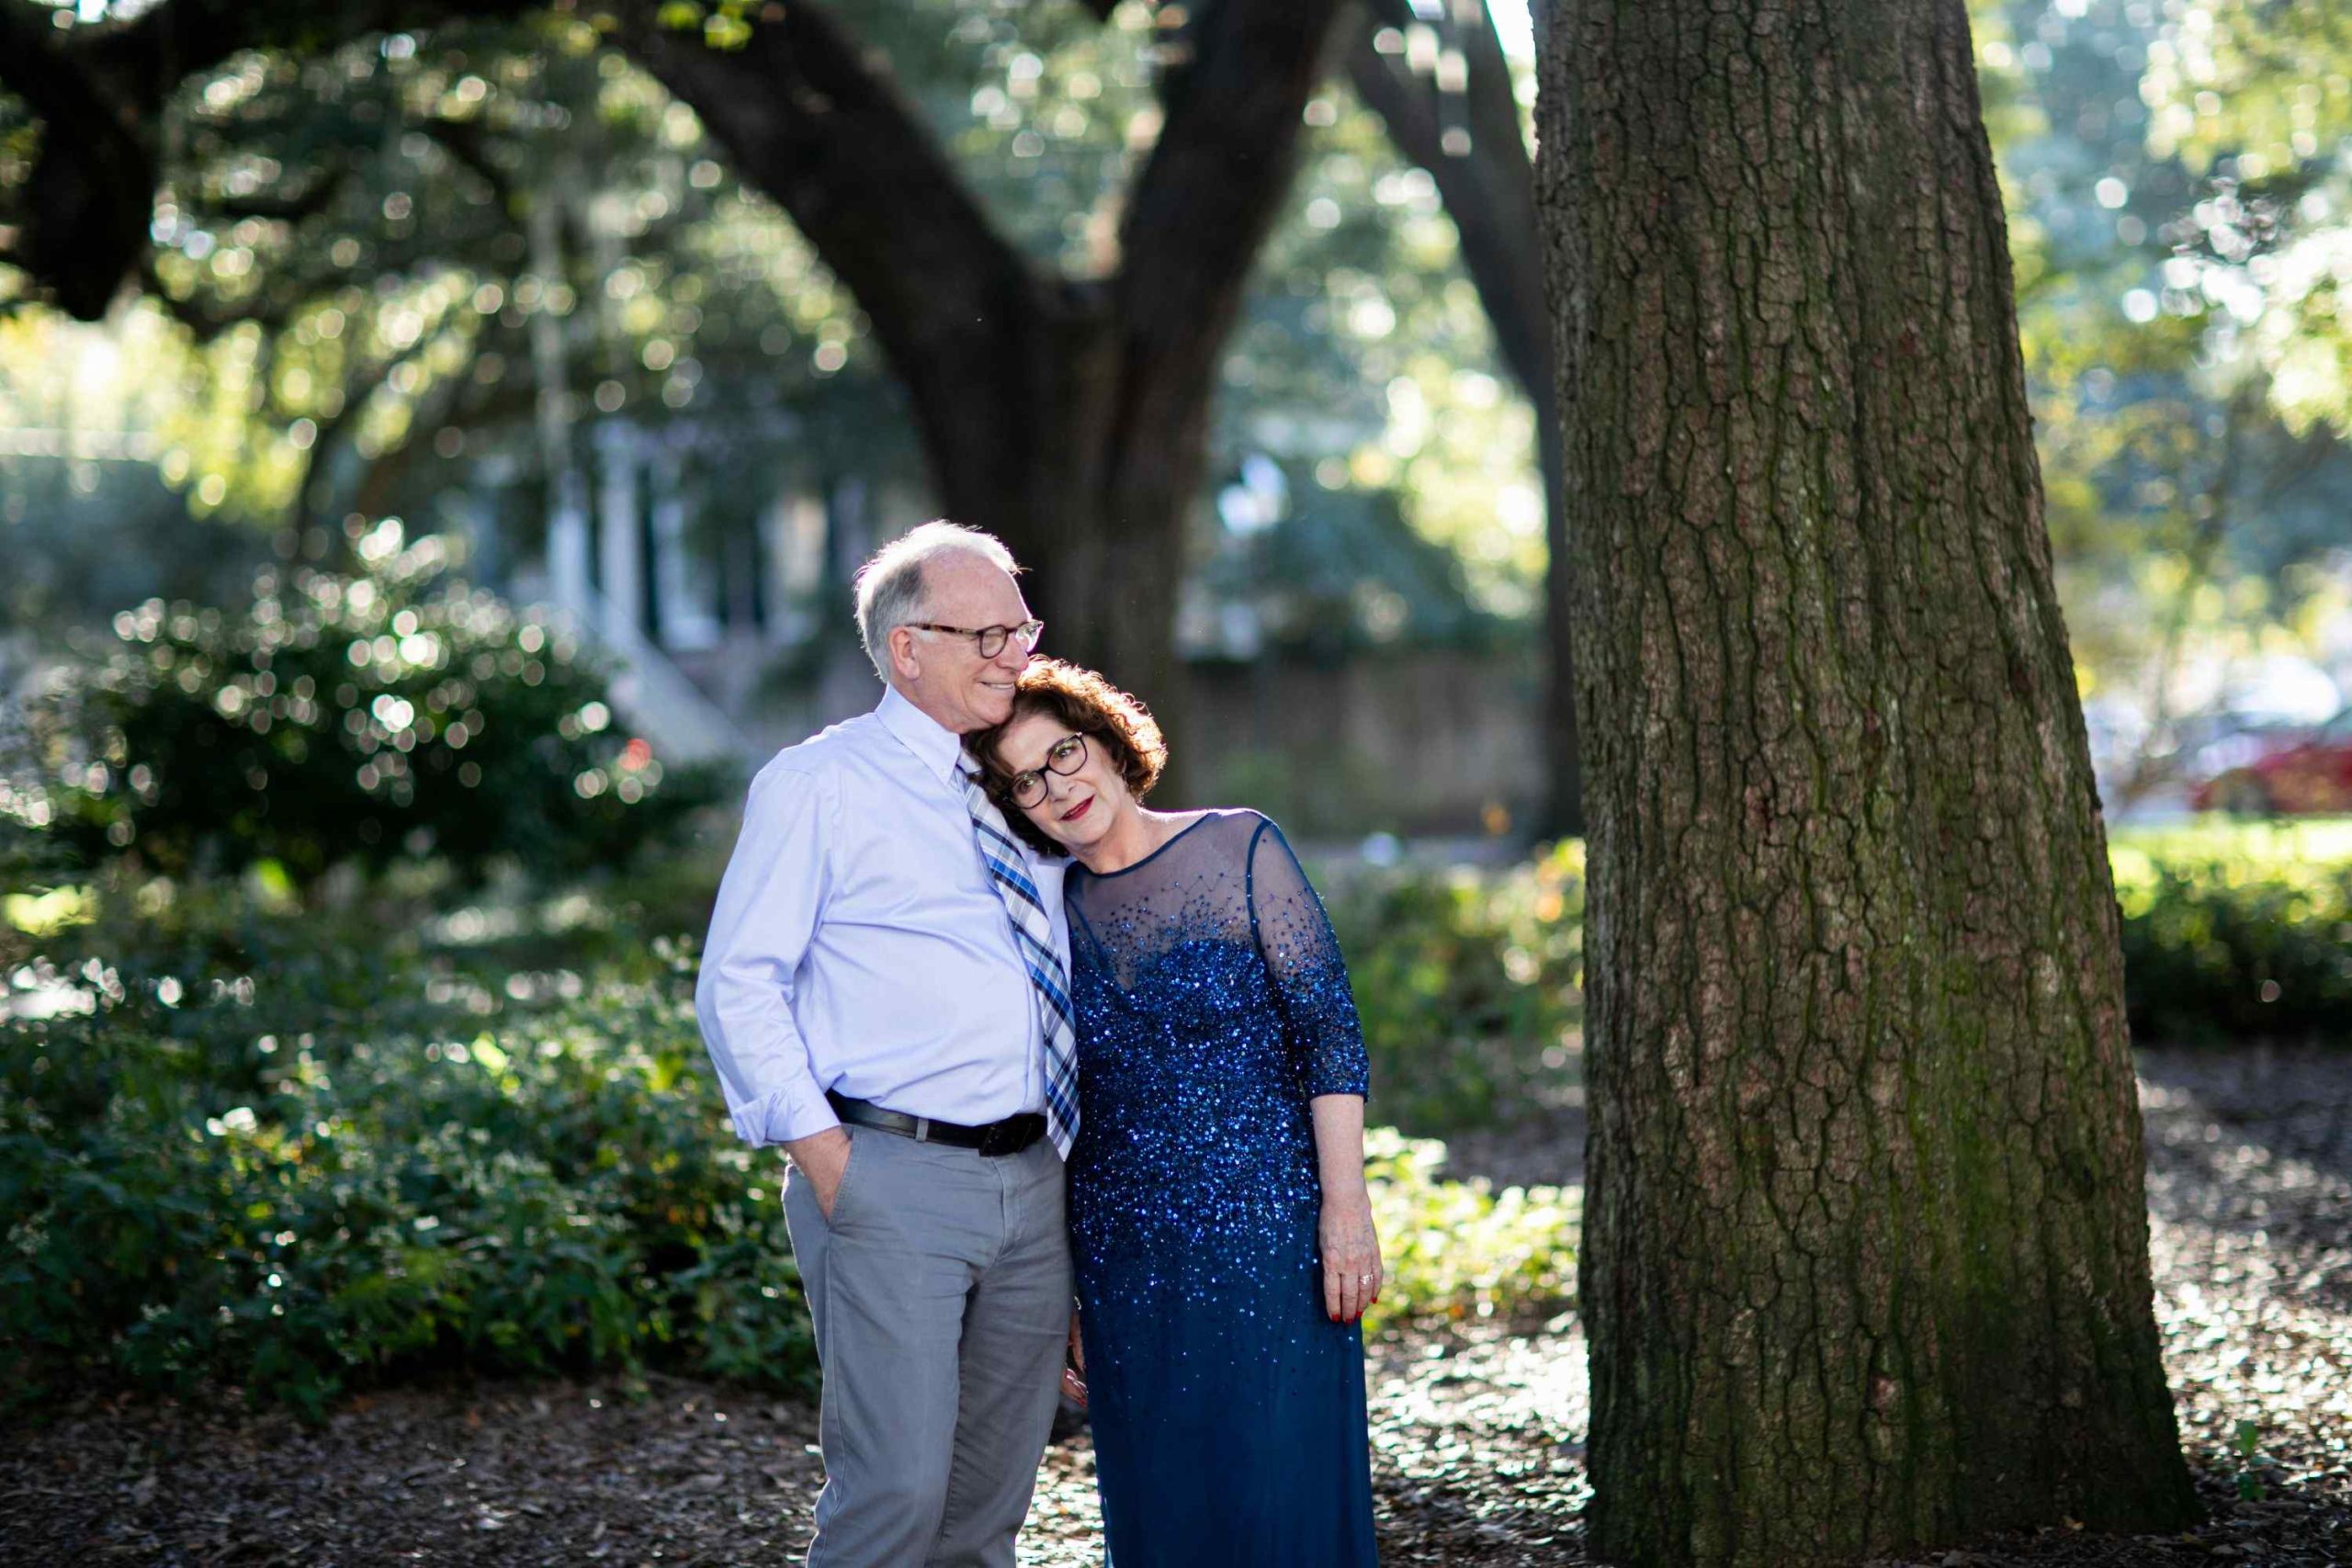 couples glamour portrait outside in Savannah